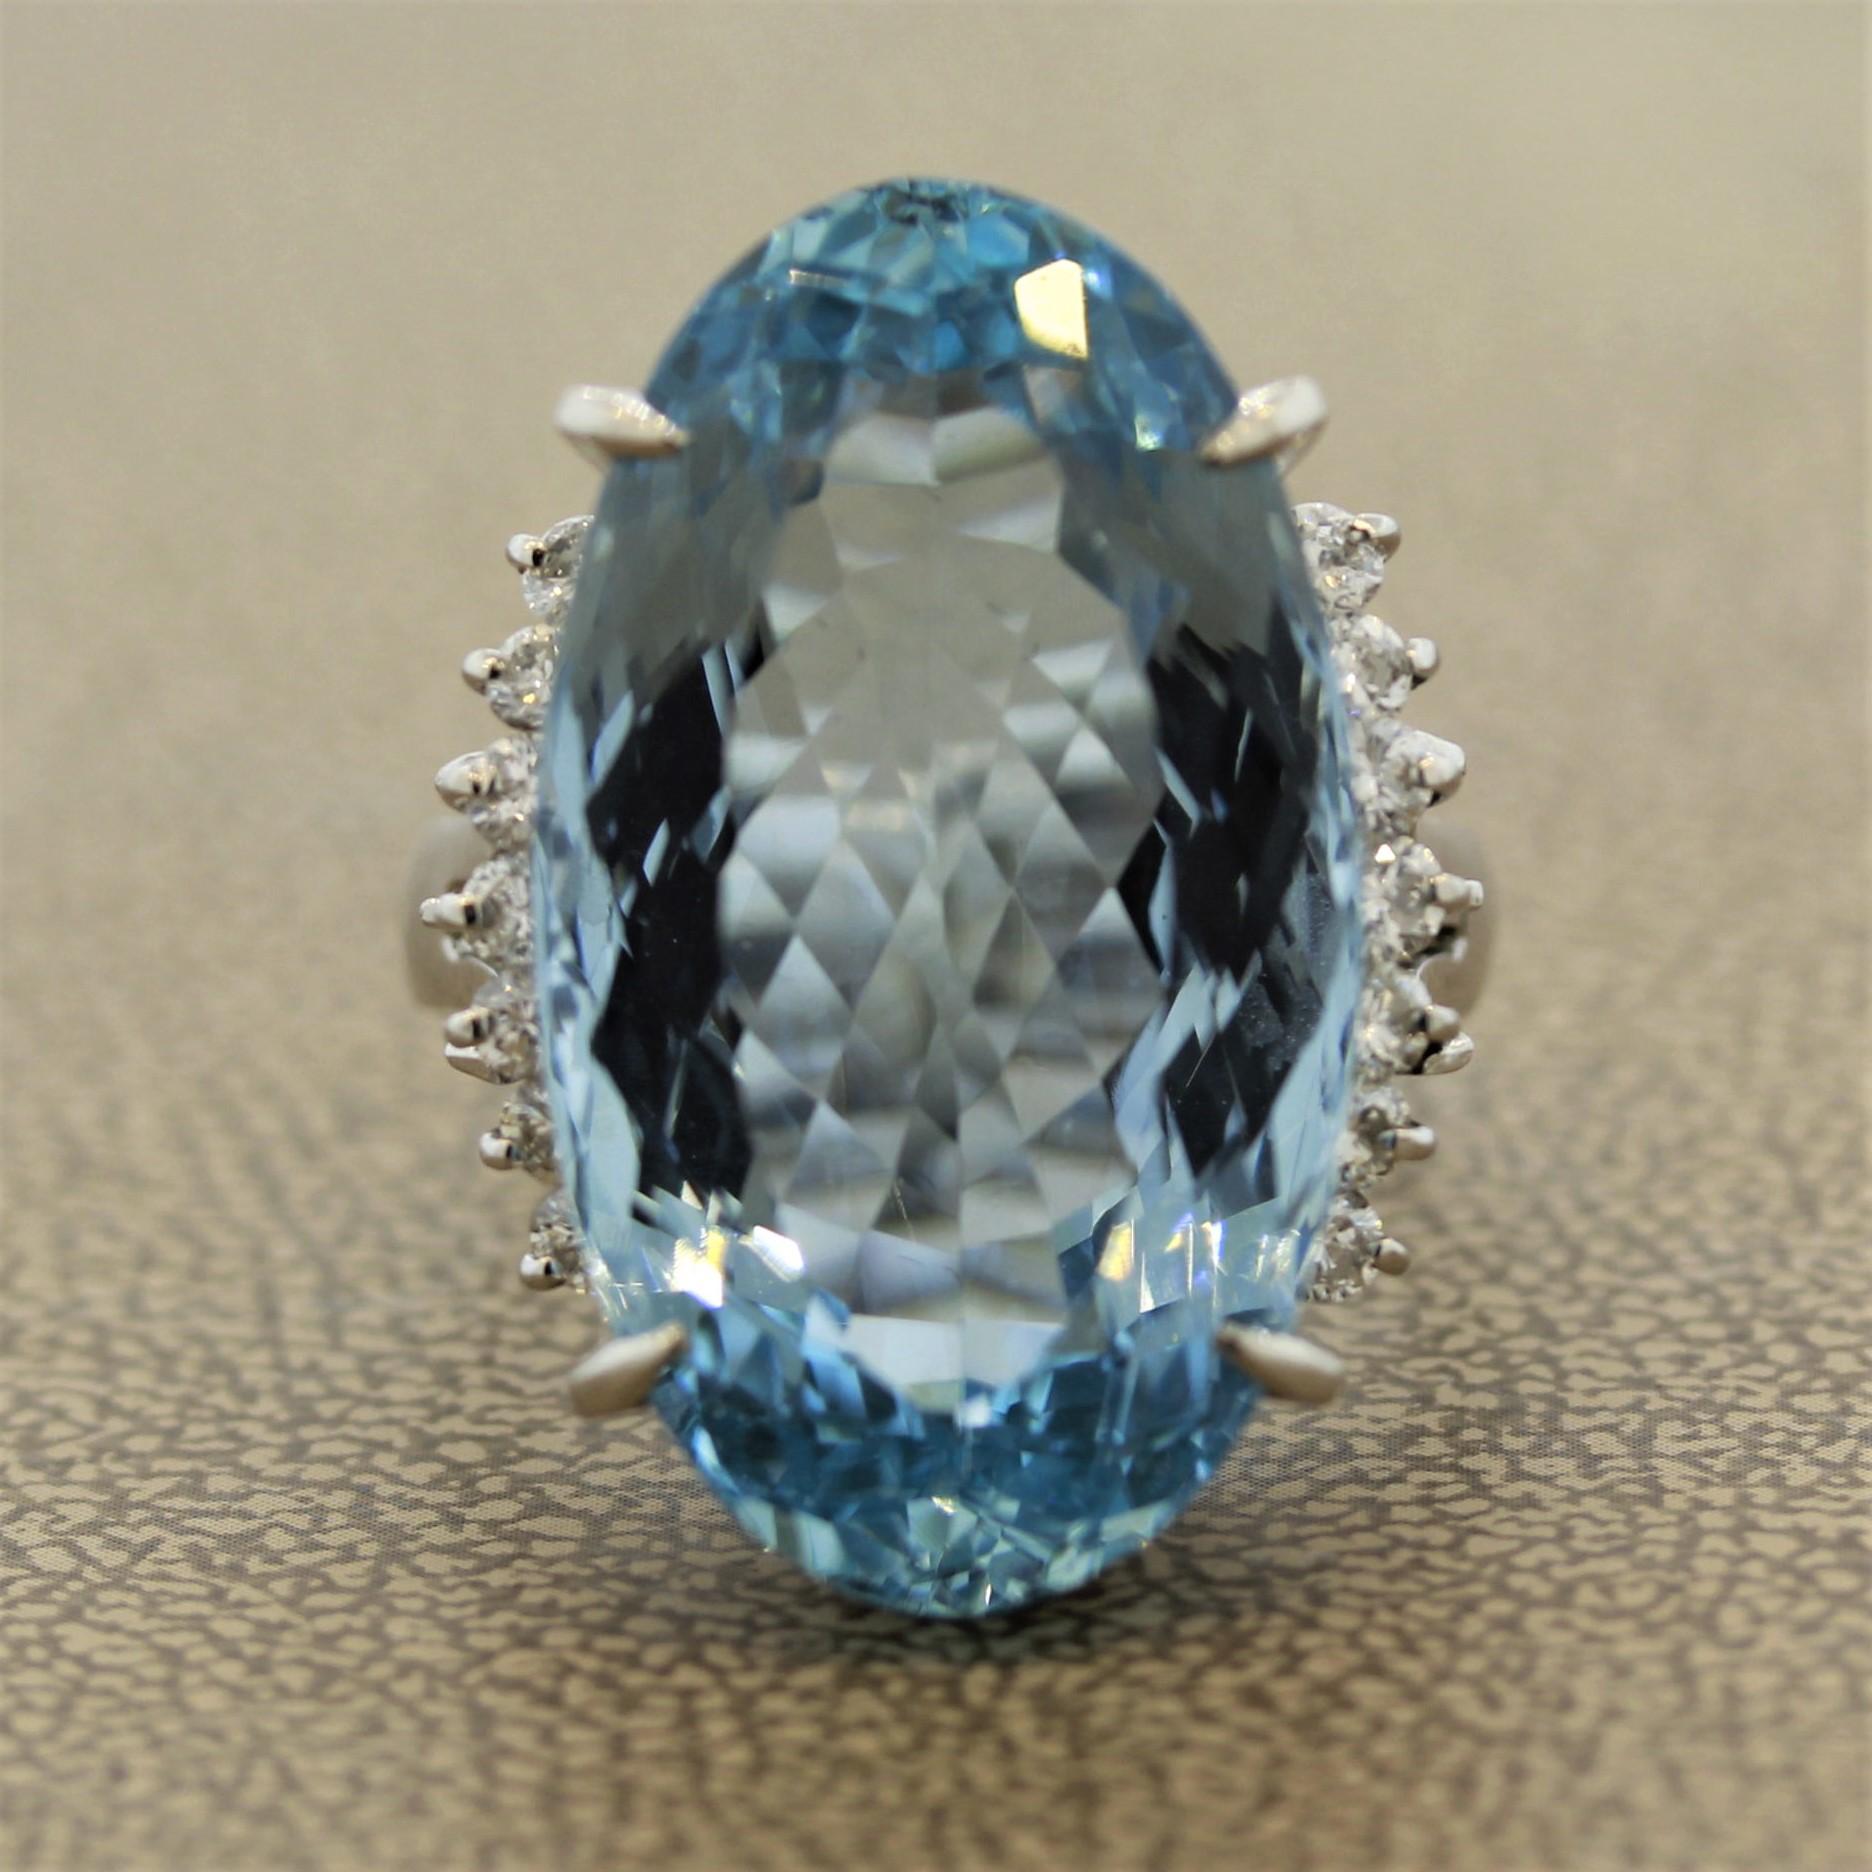 This elegant and brilliant ring will surely be noticed even from far away as it boasts an immense 22.70 carat aquamarine as the center stone. The aquamarine has a superb shape along with a sweet ocean blue color, a truly fine stone. Accenting the